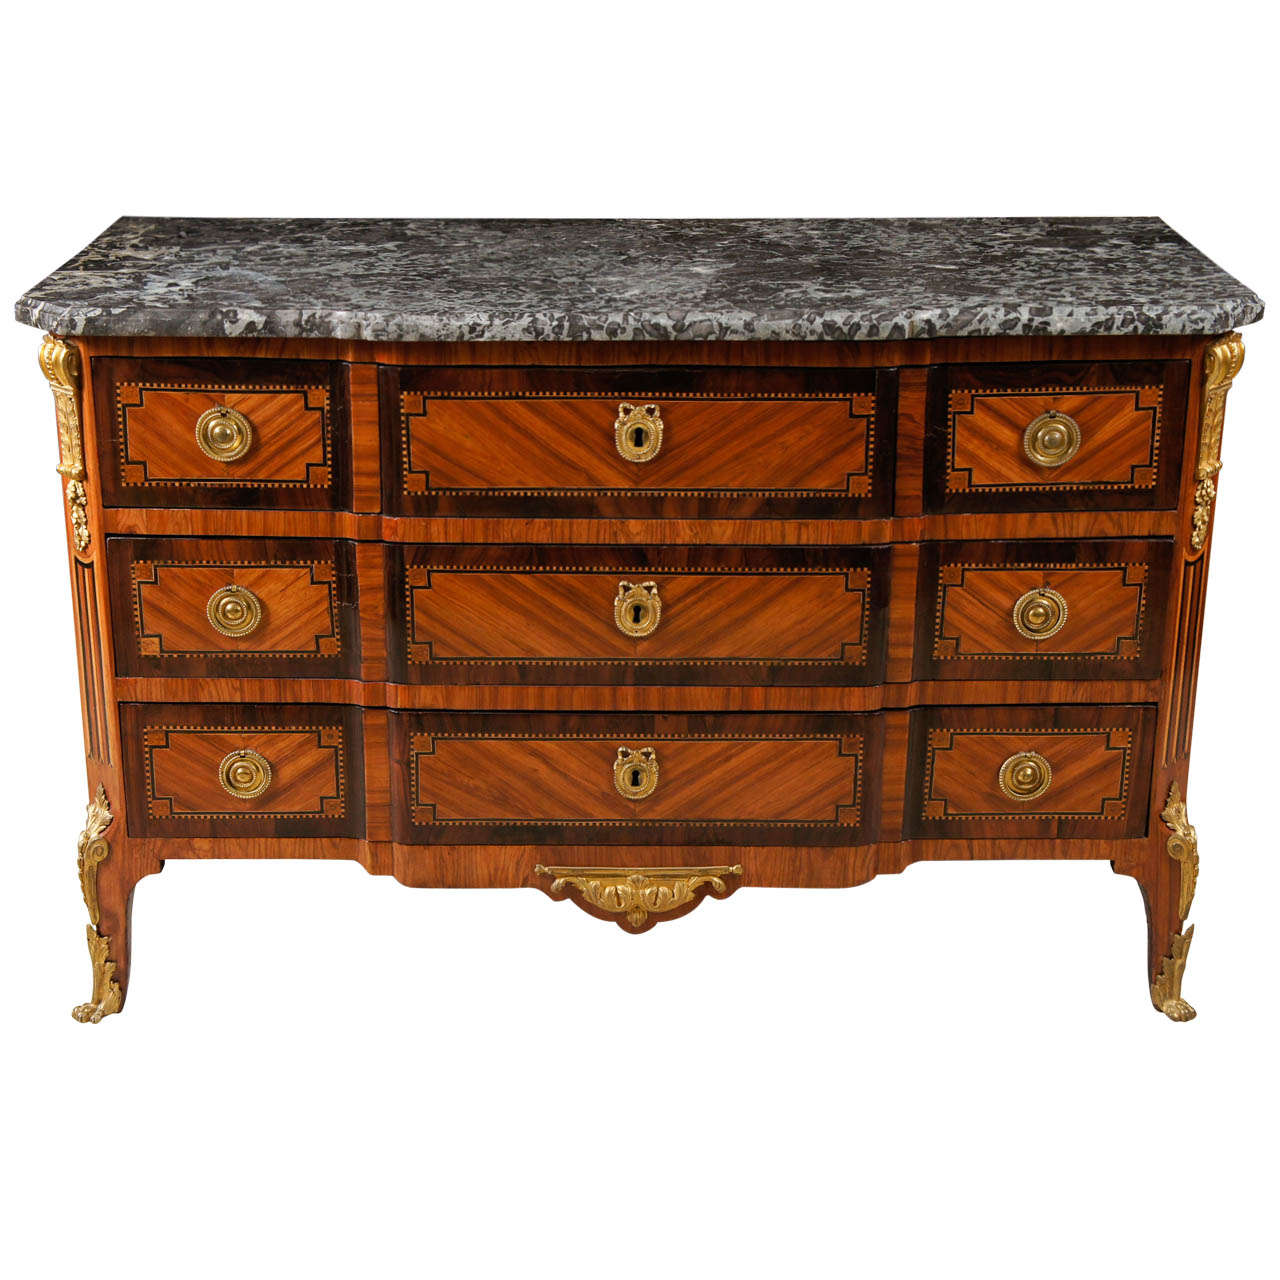 18th C. Transitional  Louis XV to Louis XVI Marquetry Marble Topped Commode